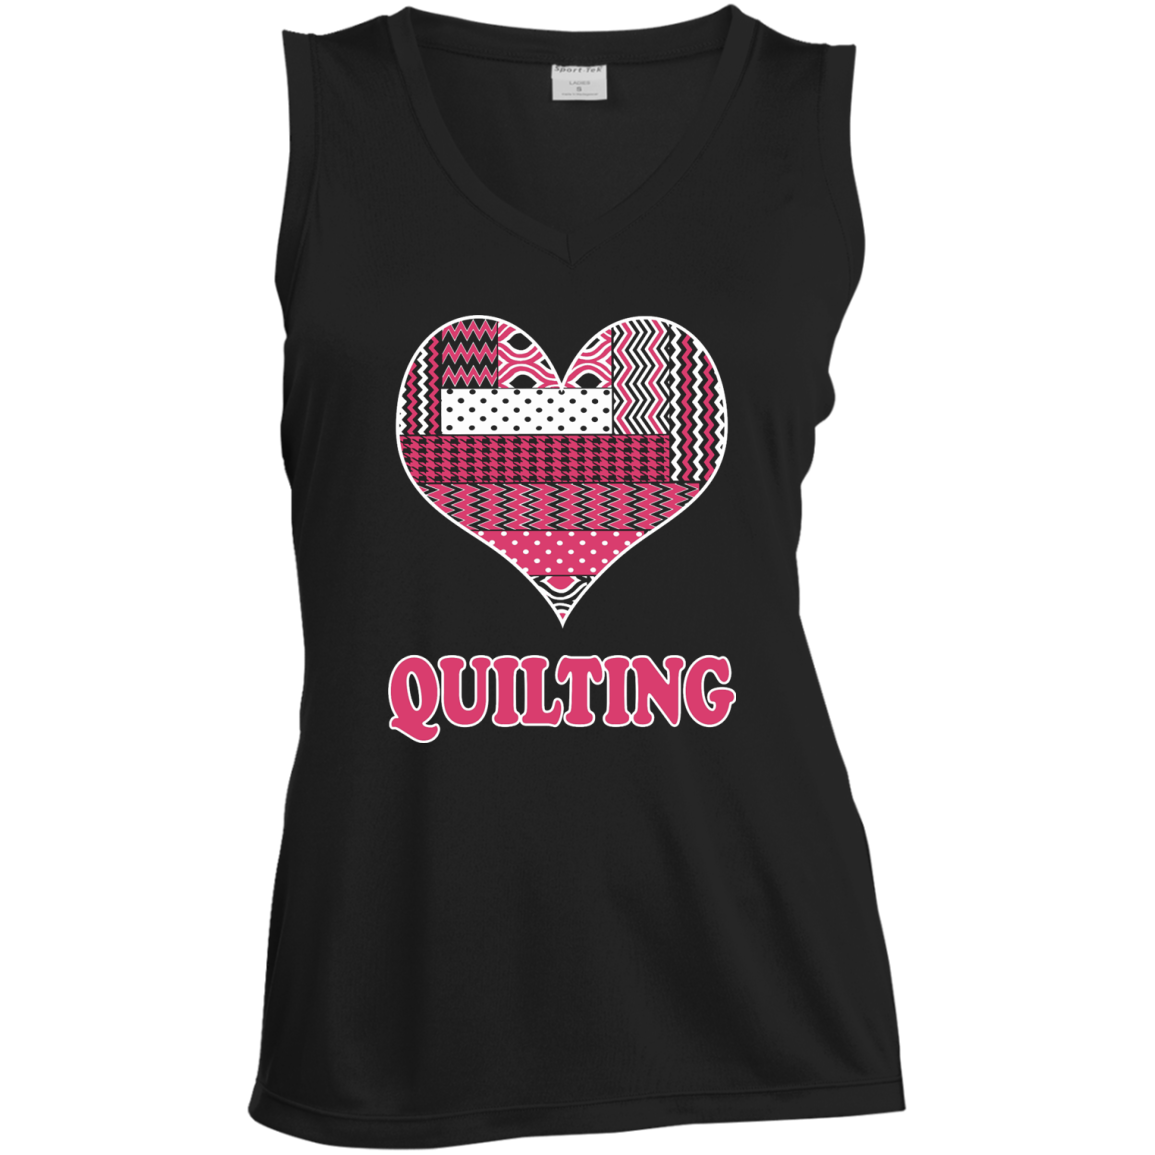 Heart Quilting Ladies Sleeveless V-Neck - Crafter4Life - 2